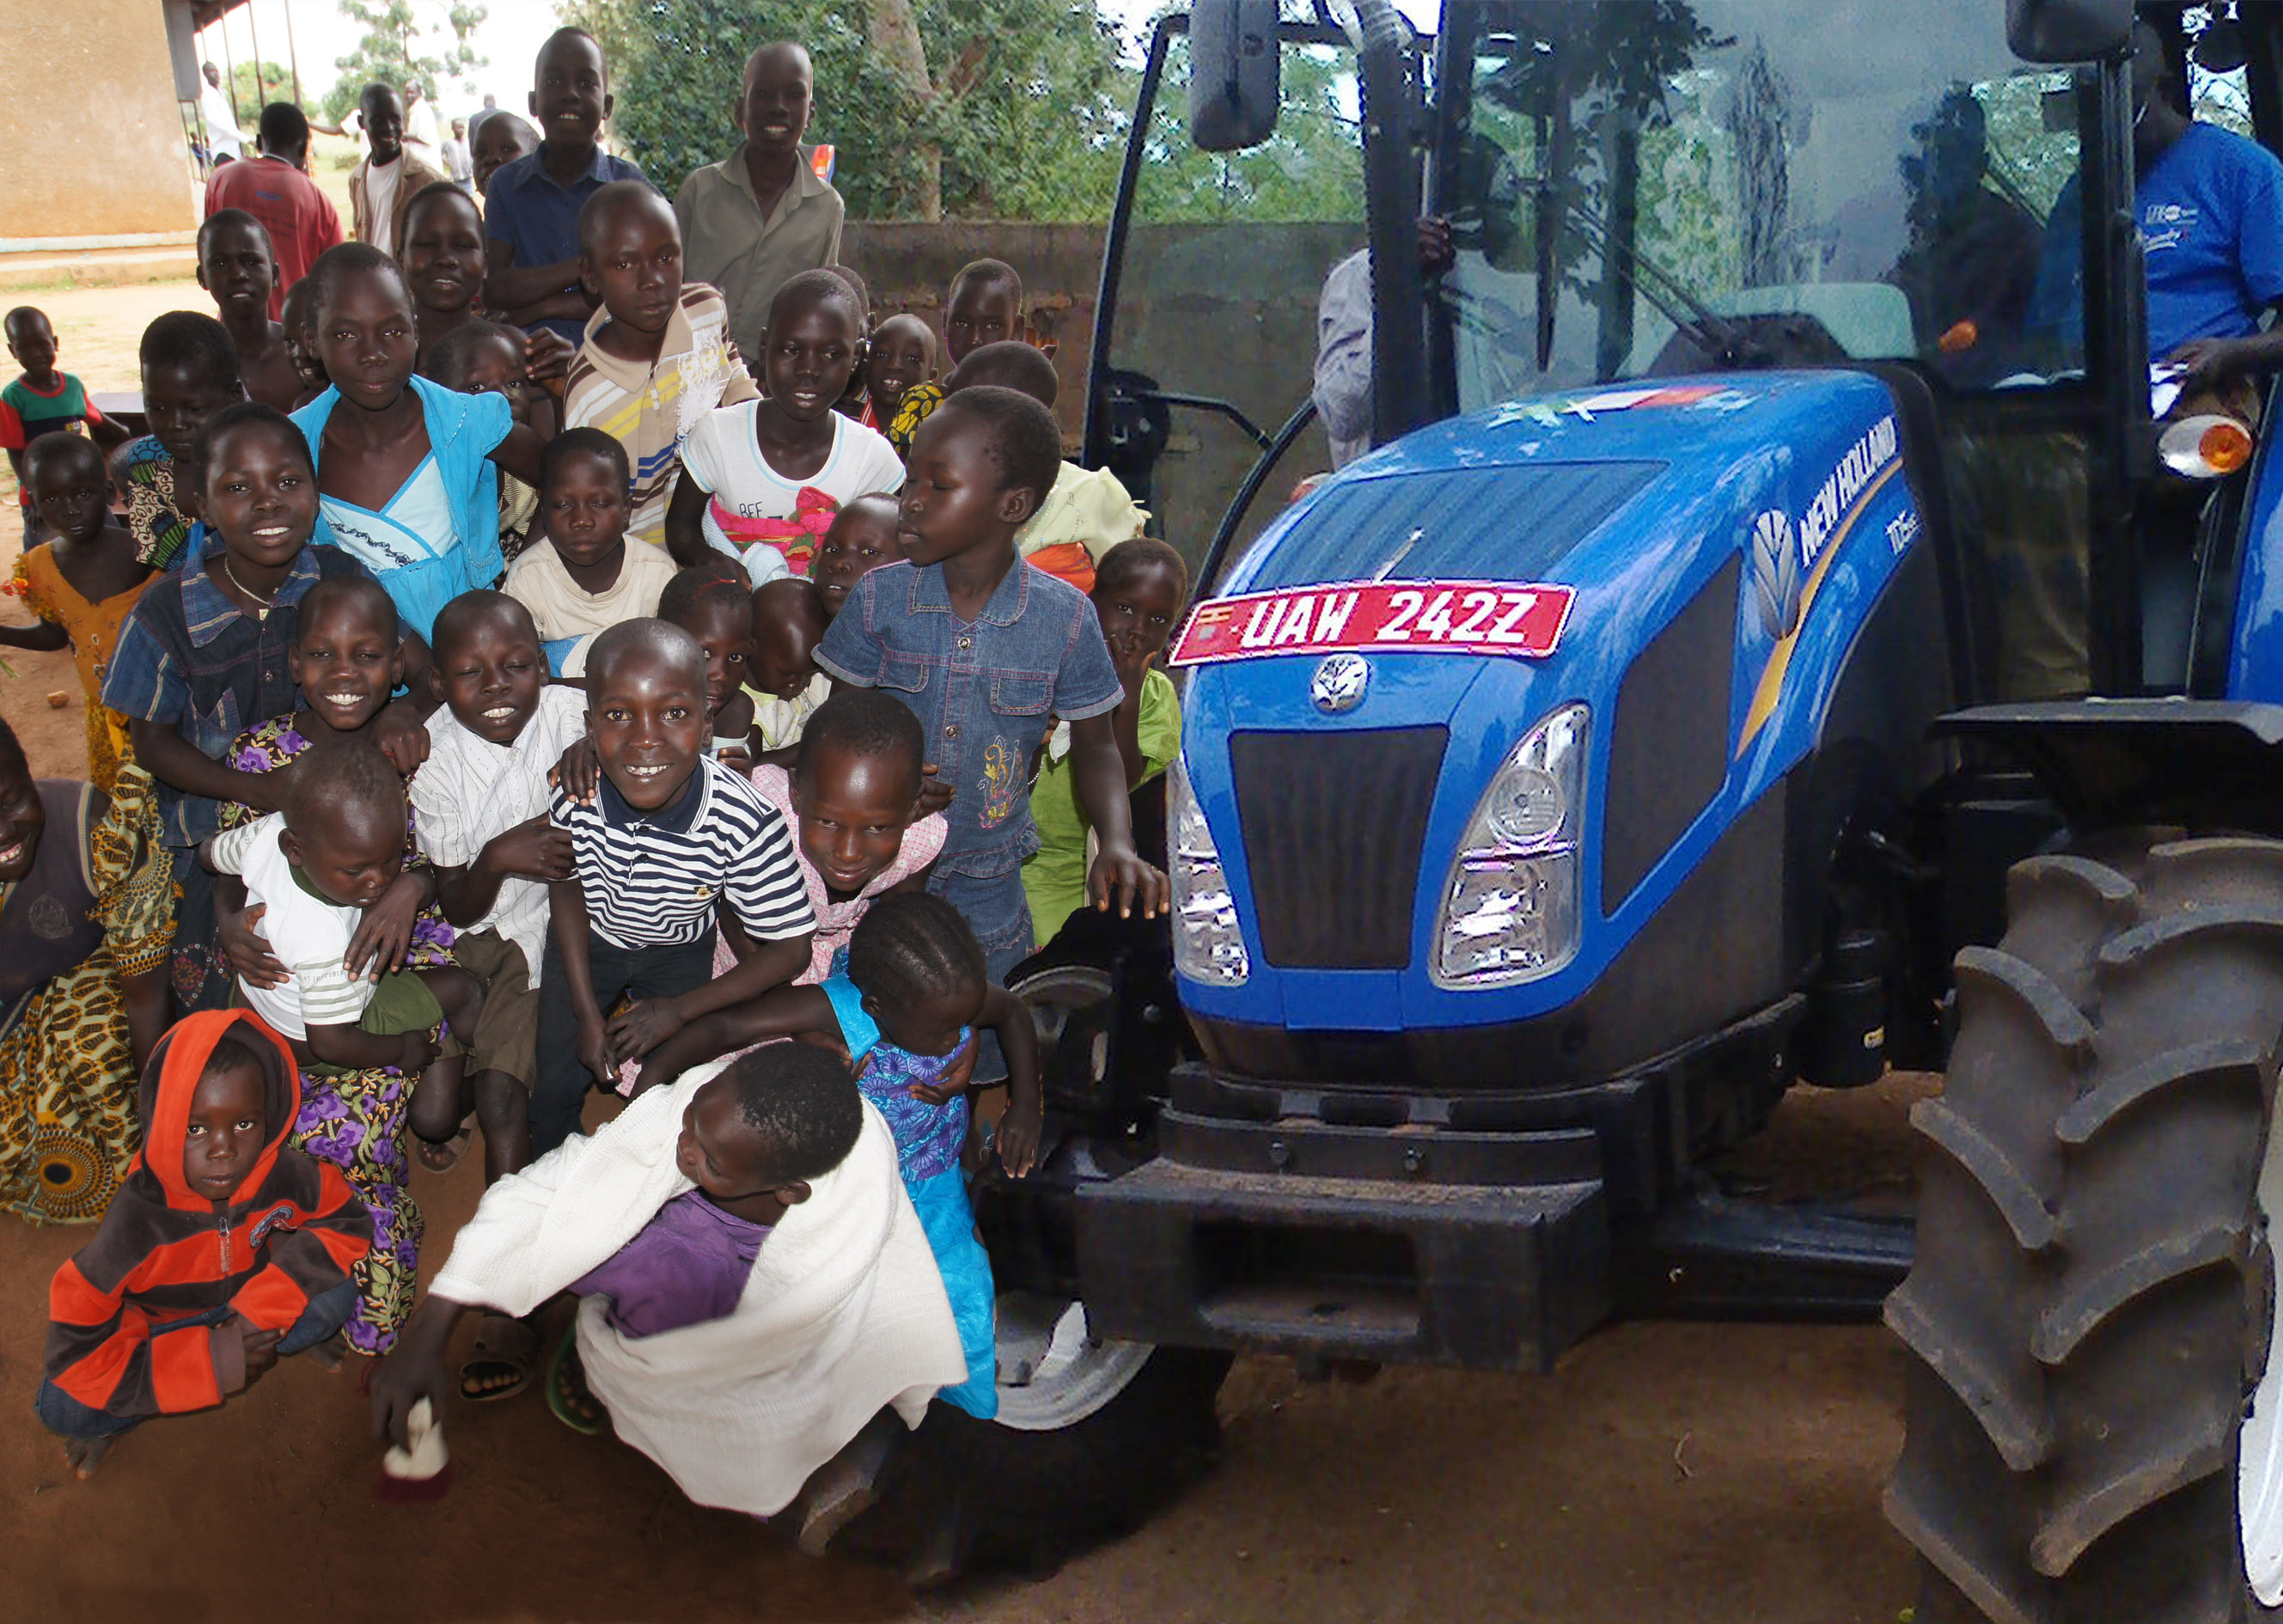 NEW HOLLAND DONATES A TD5 TRACTOR TO SUPPORT FATHER NATALINO’S MISSIONARY PROJECT IN THE AURA DIOCESE IN NORTHERN UGANDA